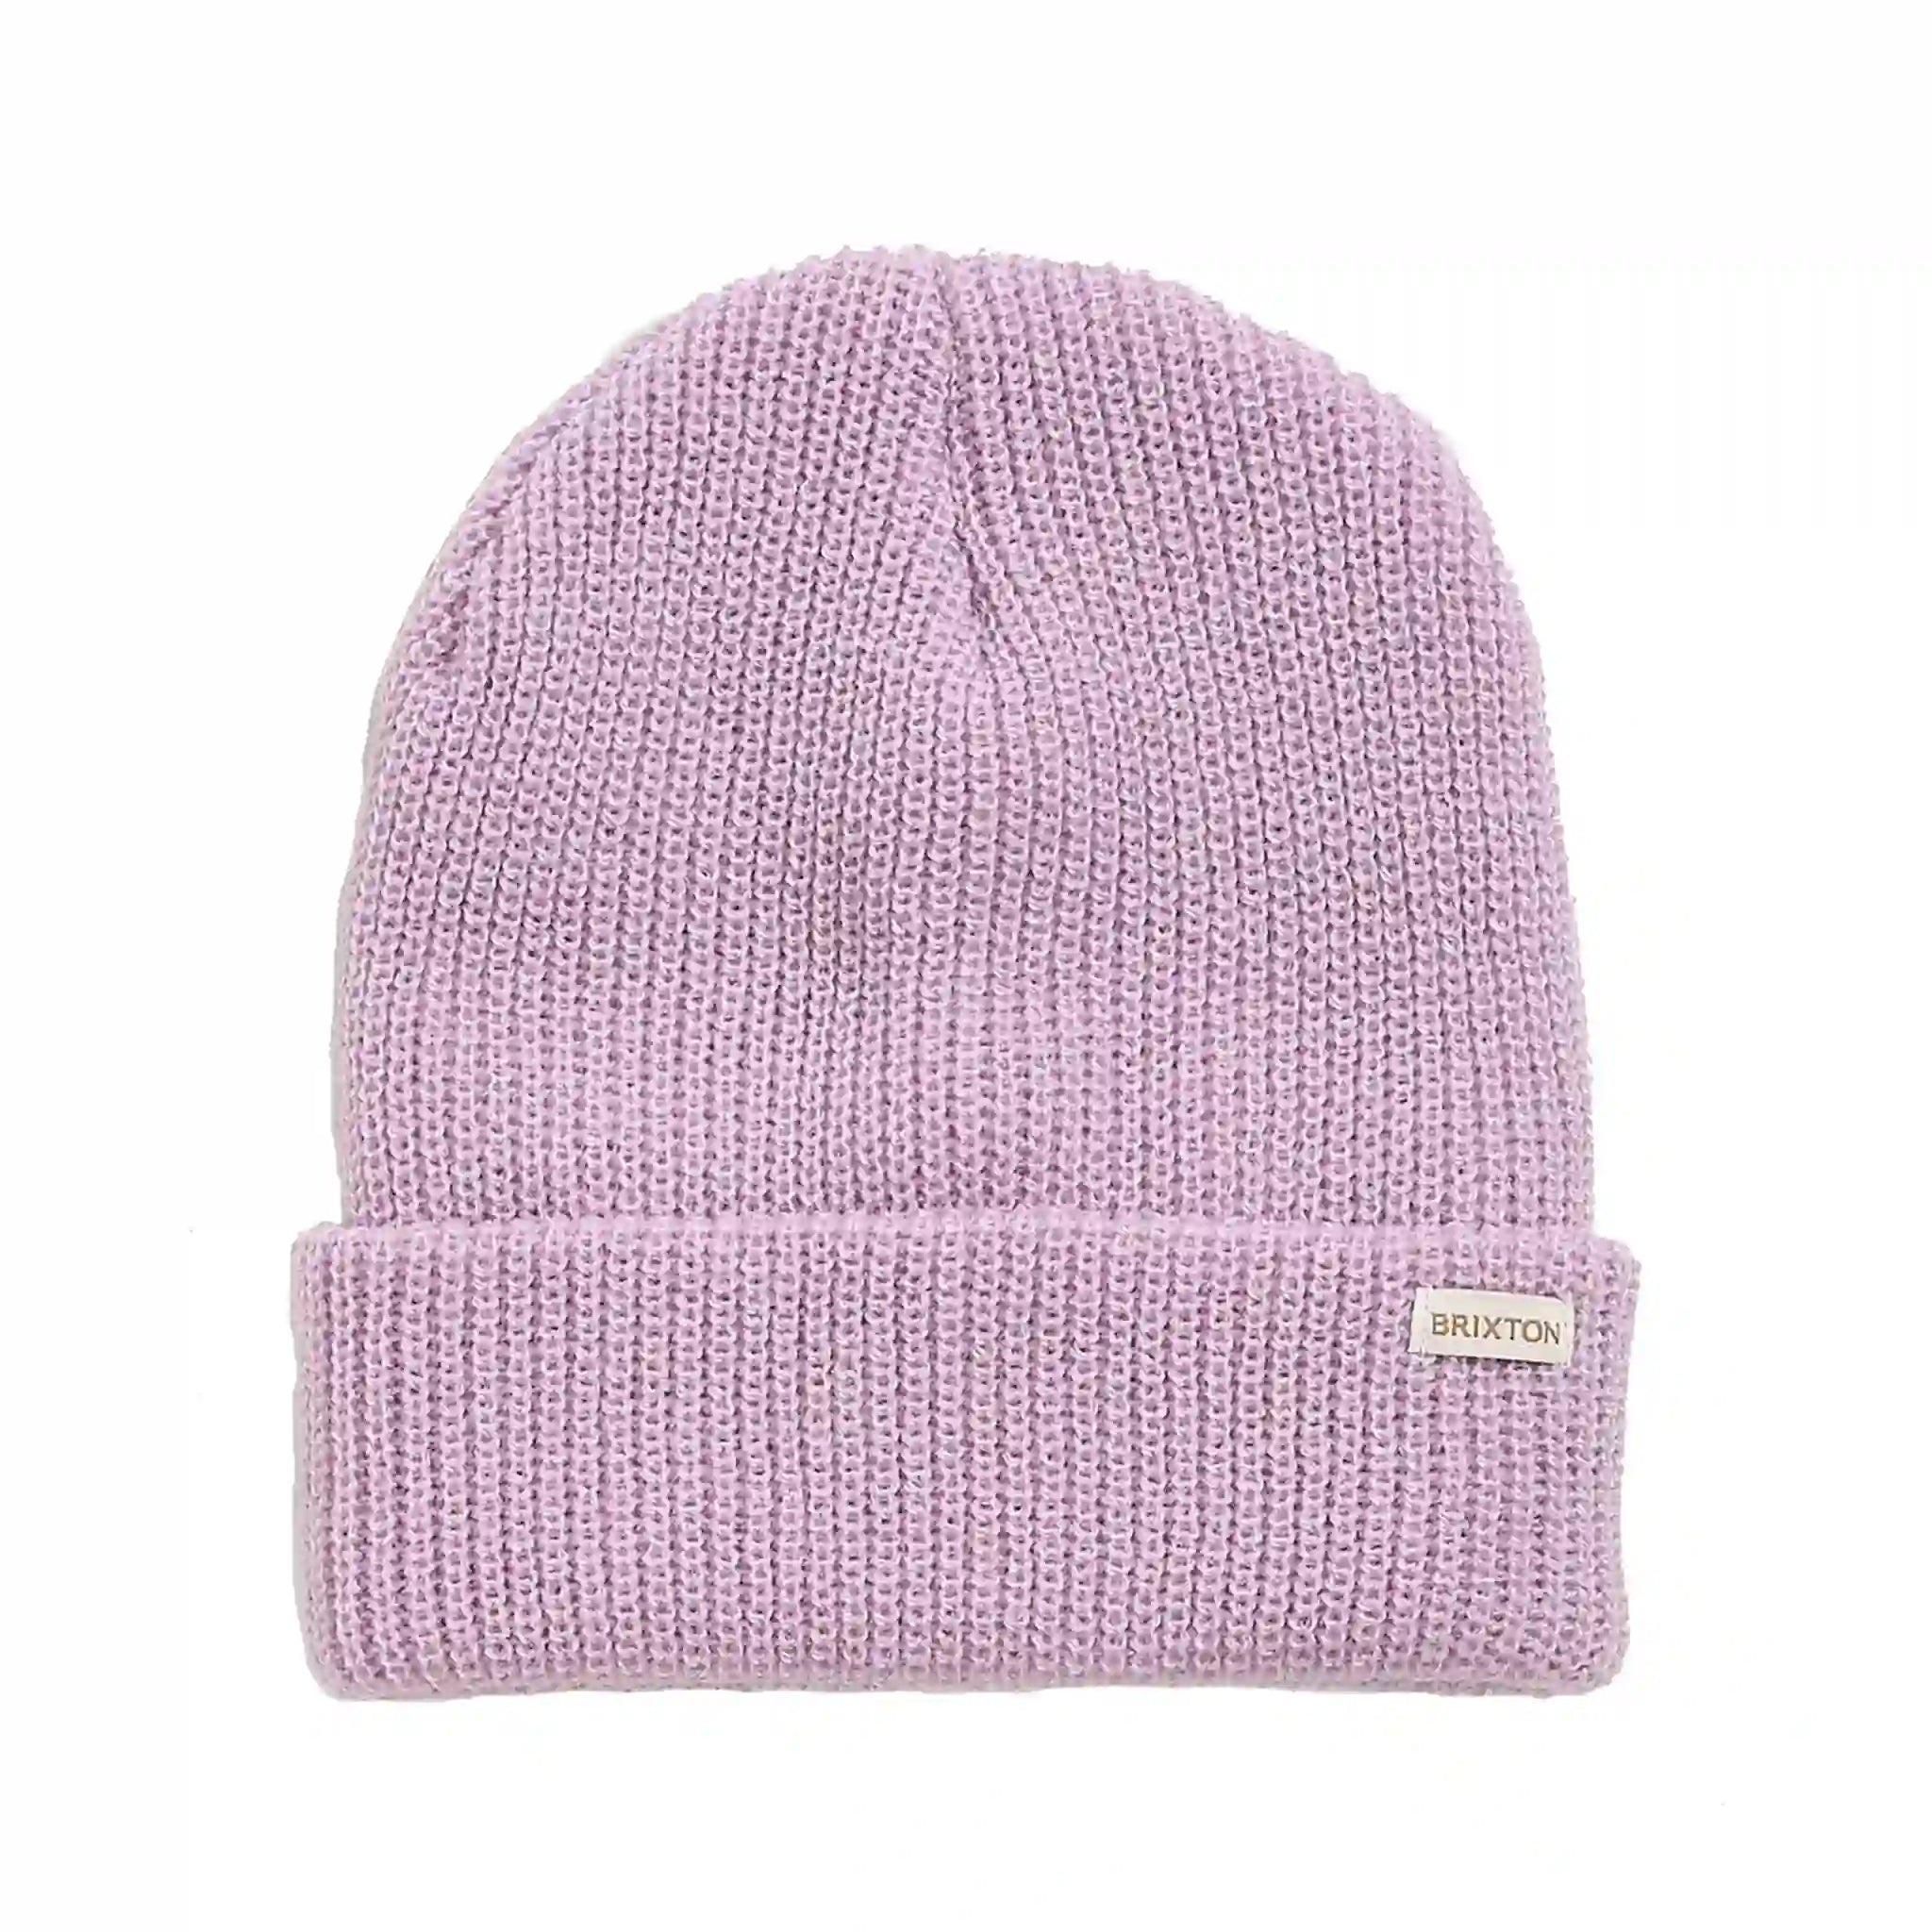 On a white background is a light purple knit beanie. 